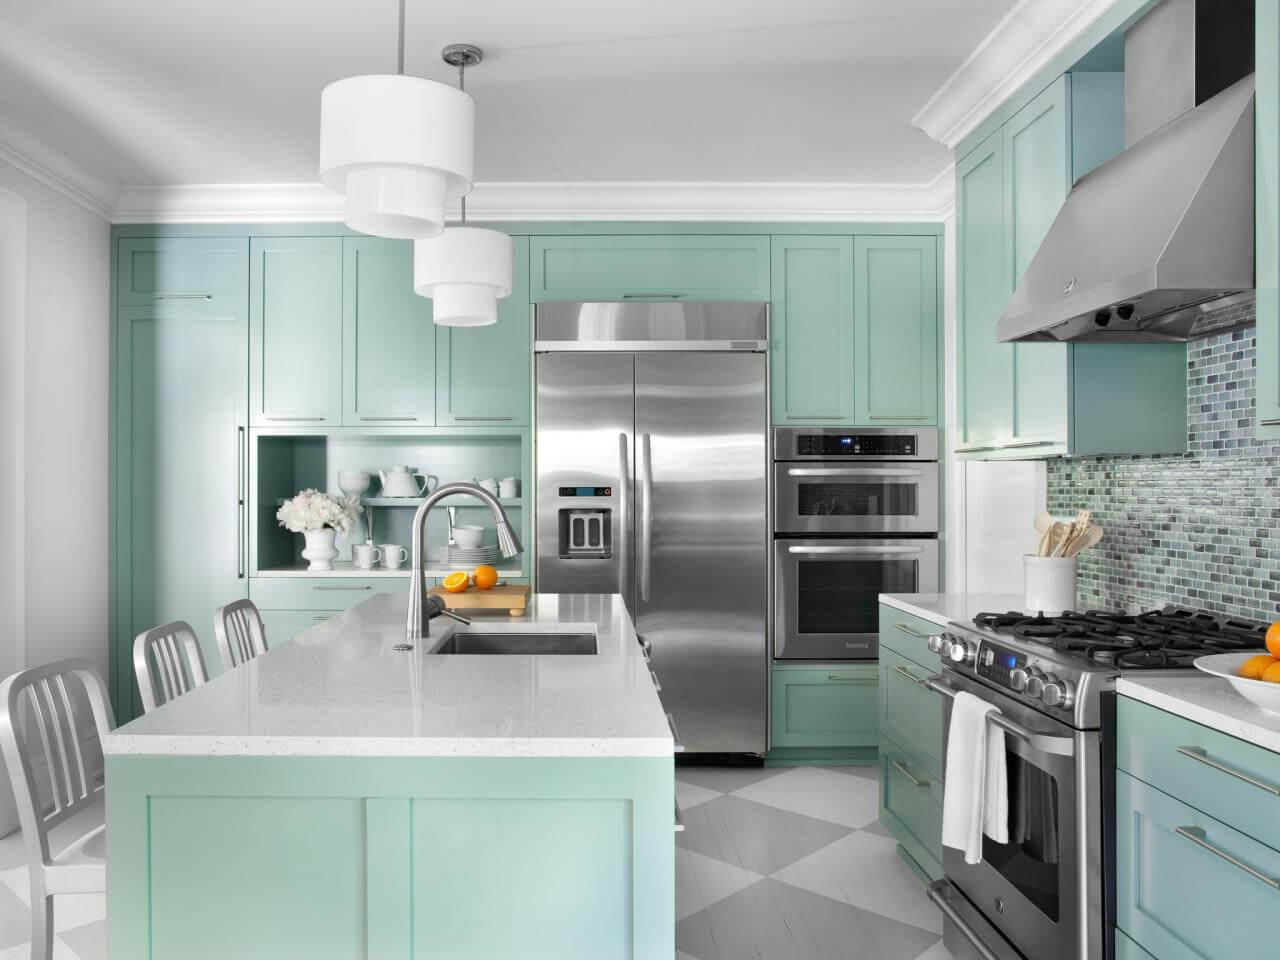 Remodel soothing kitchen cabinet